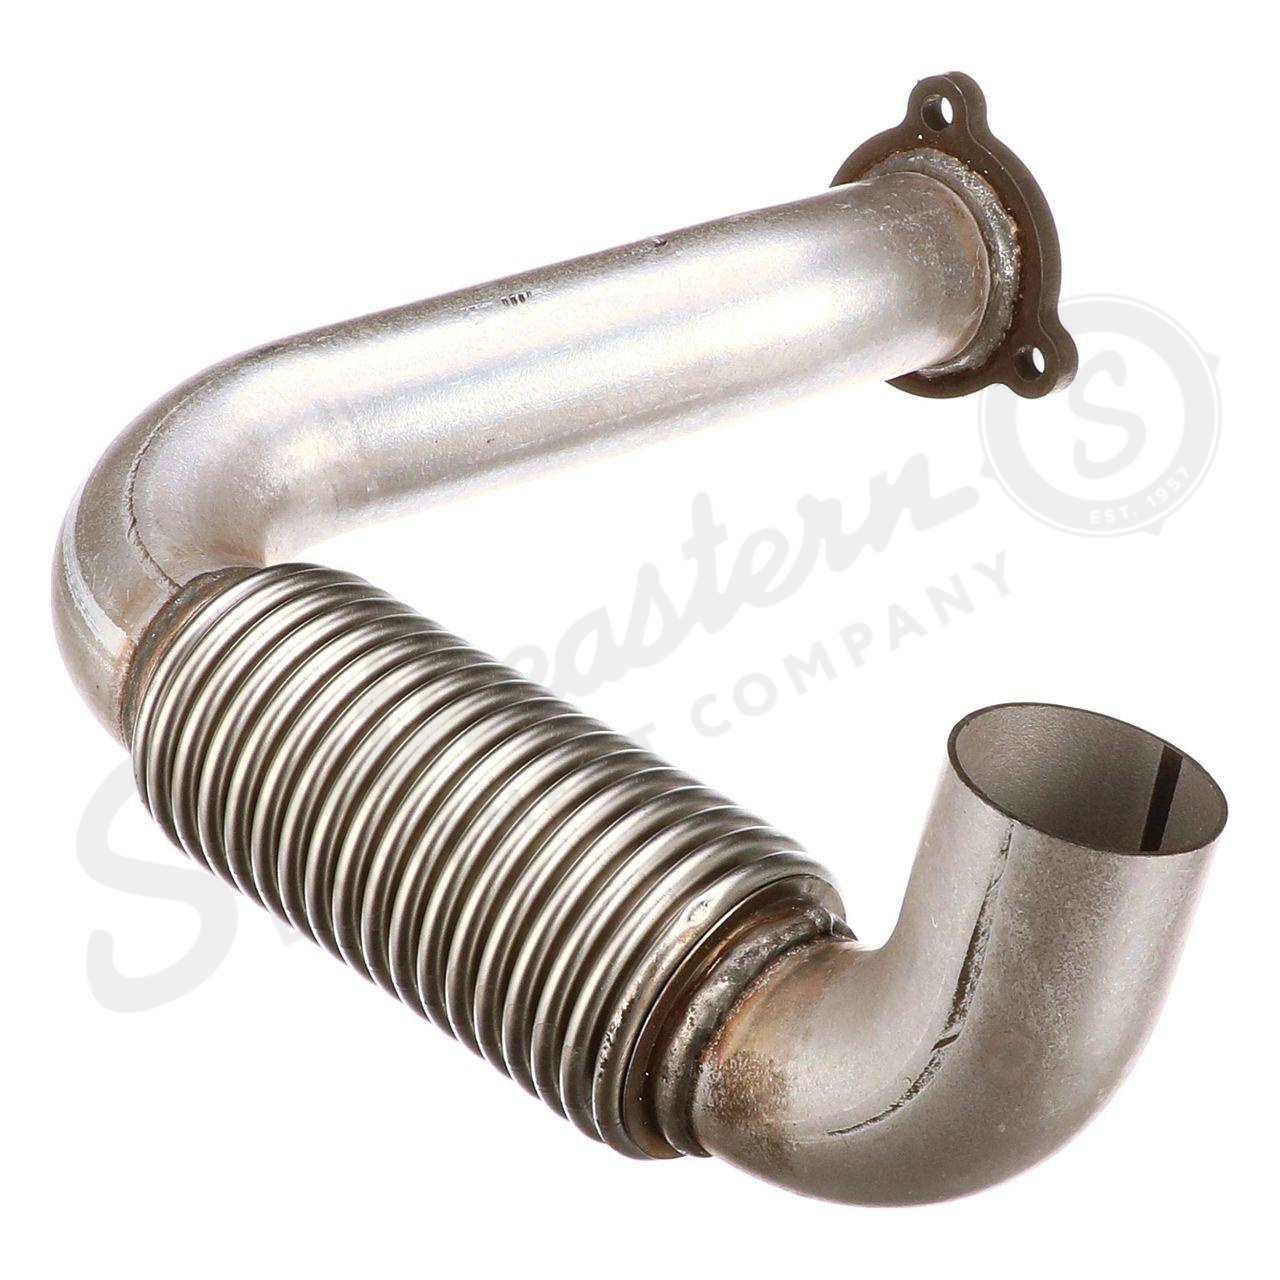 EXHAUST SYSTEM PIPE